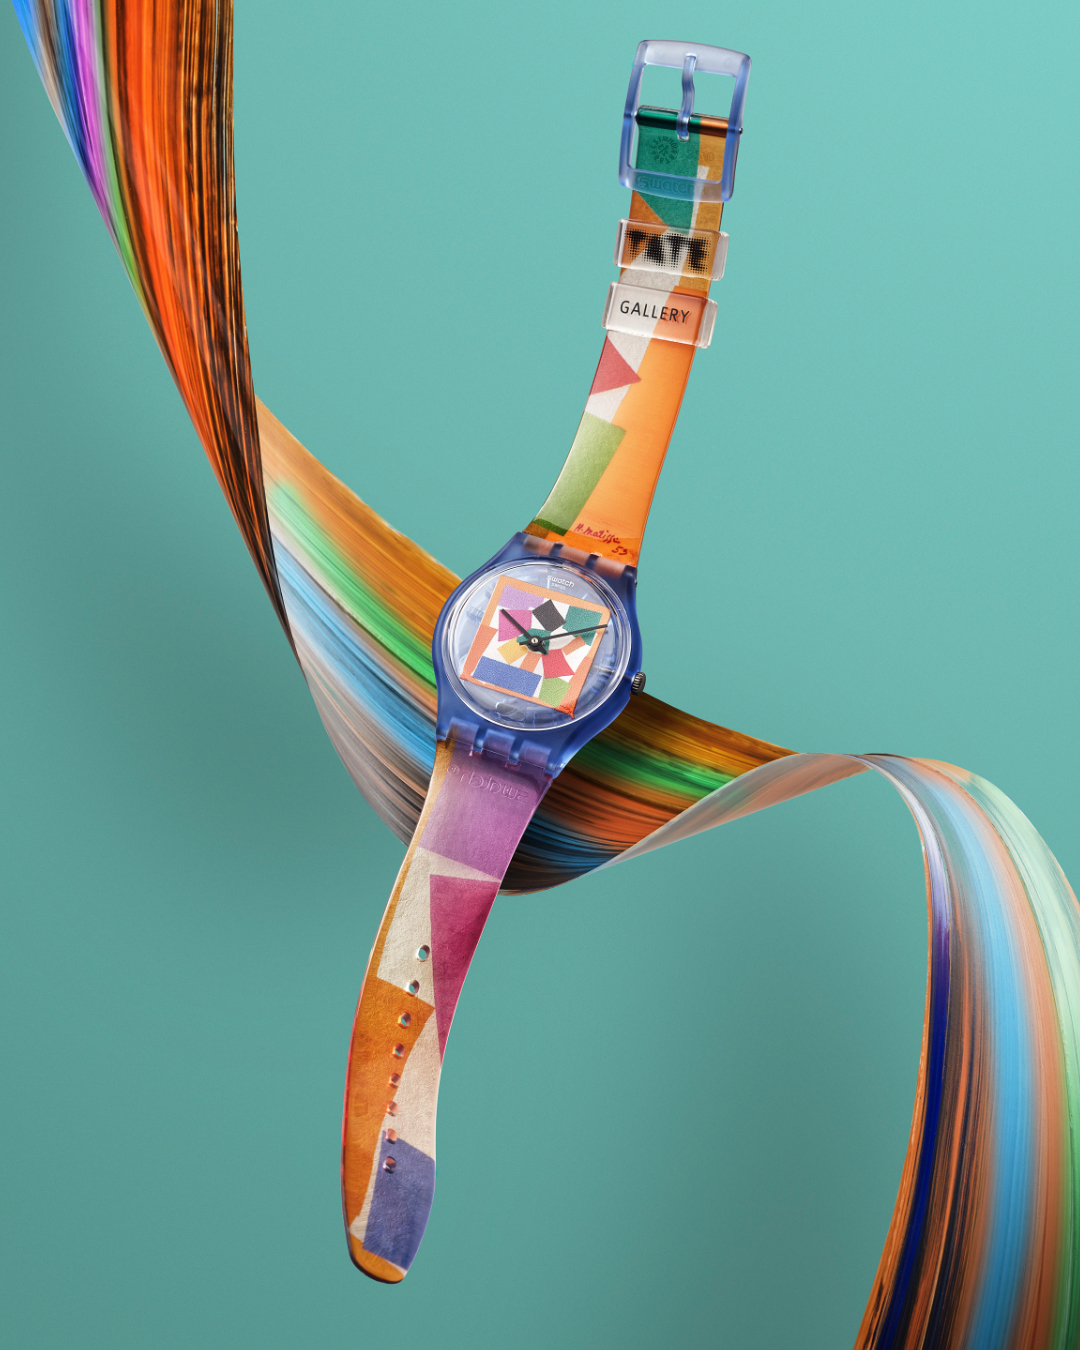 An artistically decorated watch in an orange and purplecolourway against a matching background